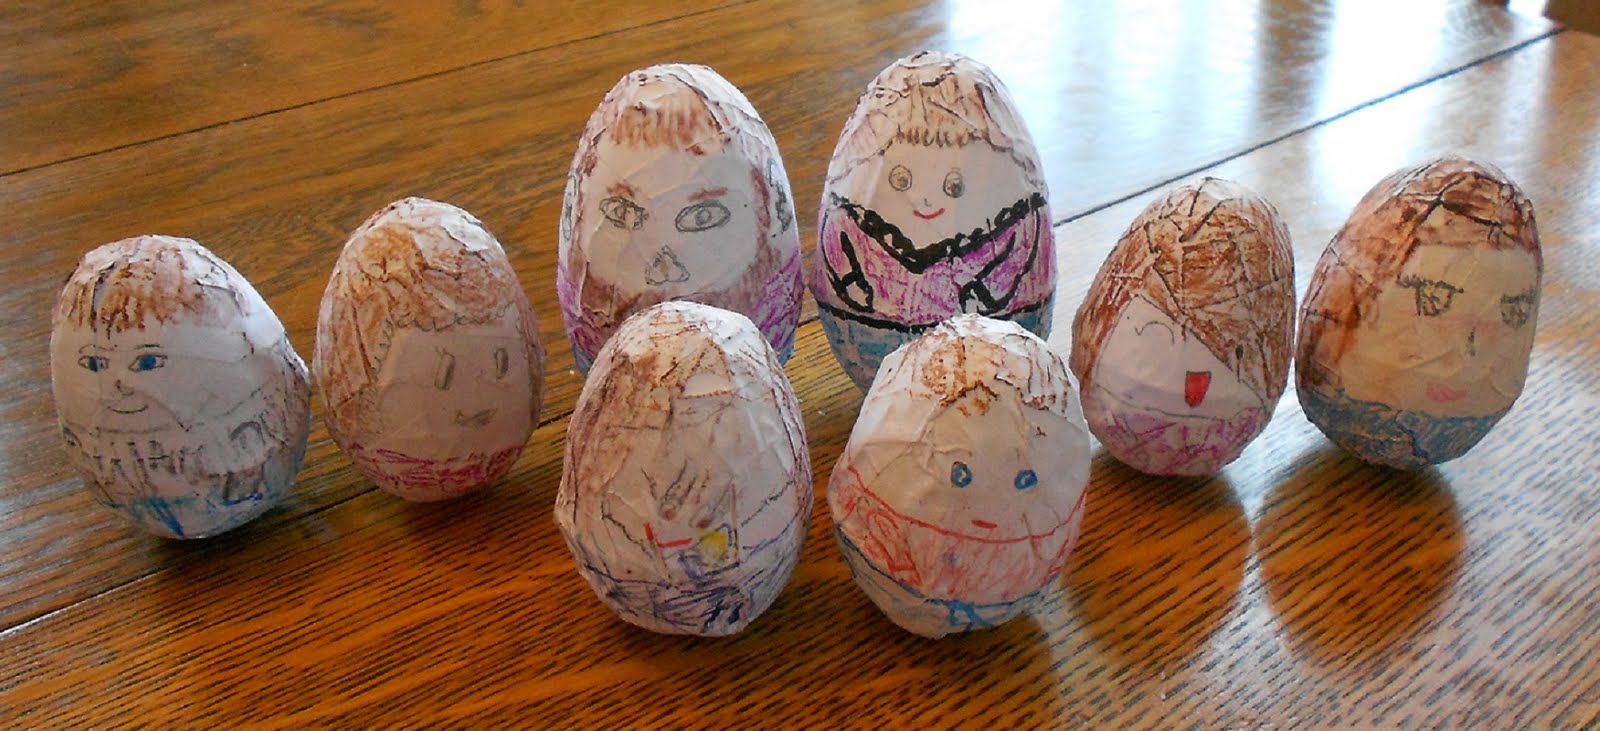 Create your own Weeble Wooble using Plastic Easter Eggs